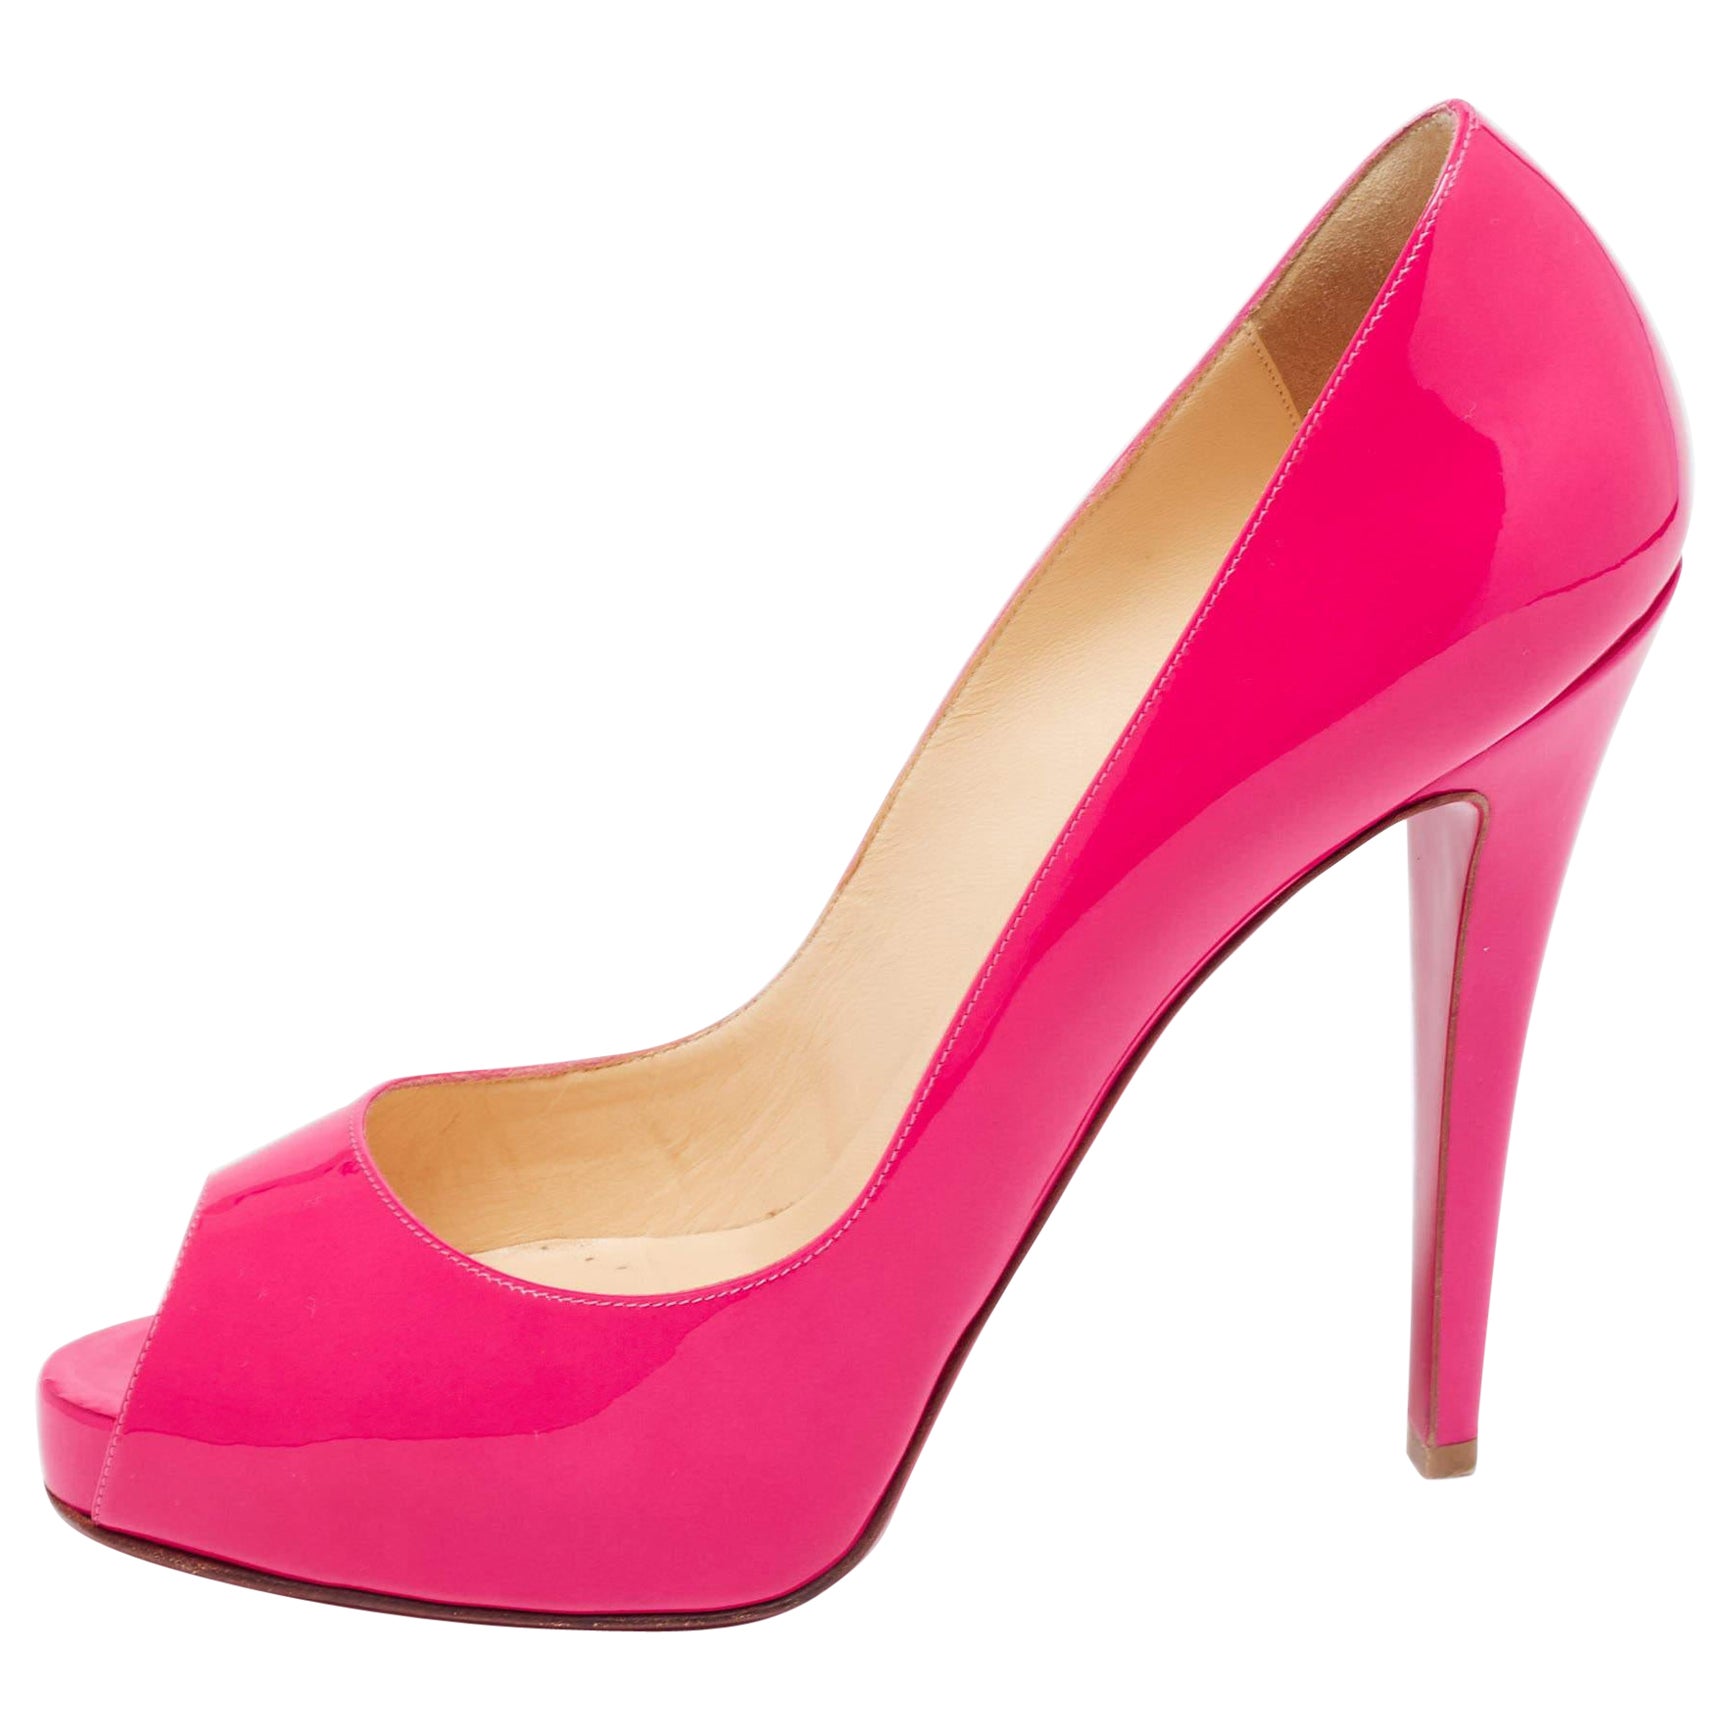 Christian Louboutin Pink Patent Leather New Very Prive Pumps Size 41 For Sale